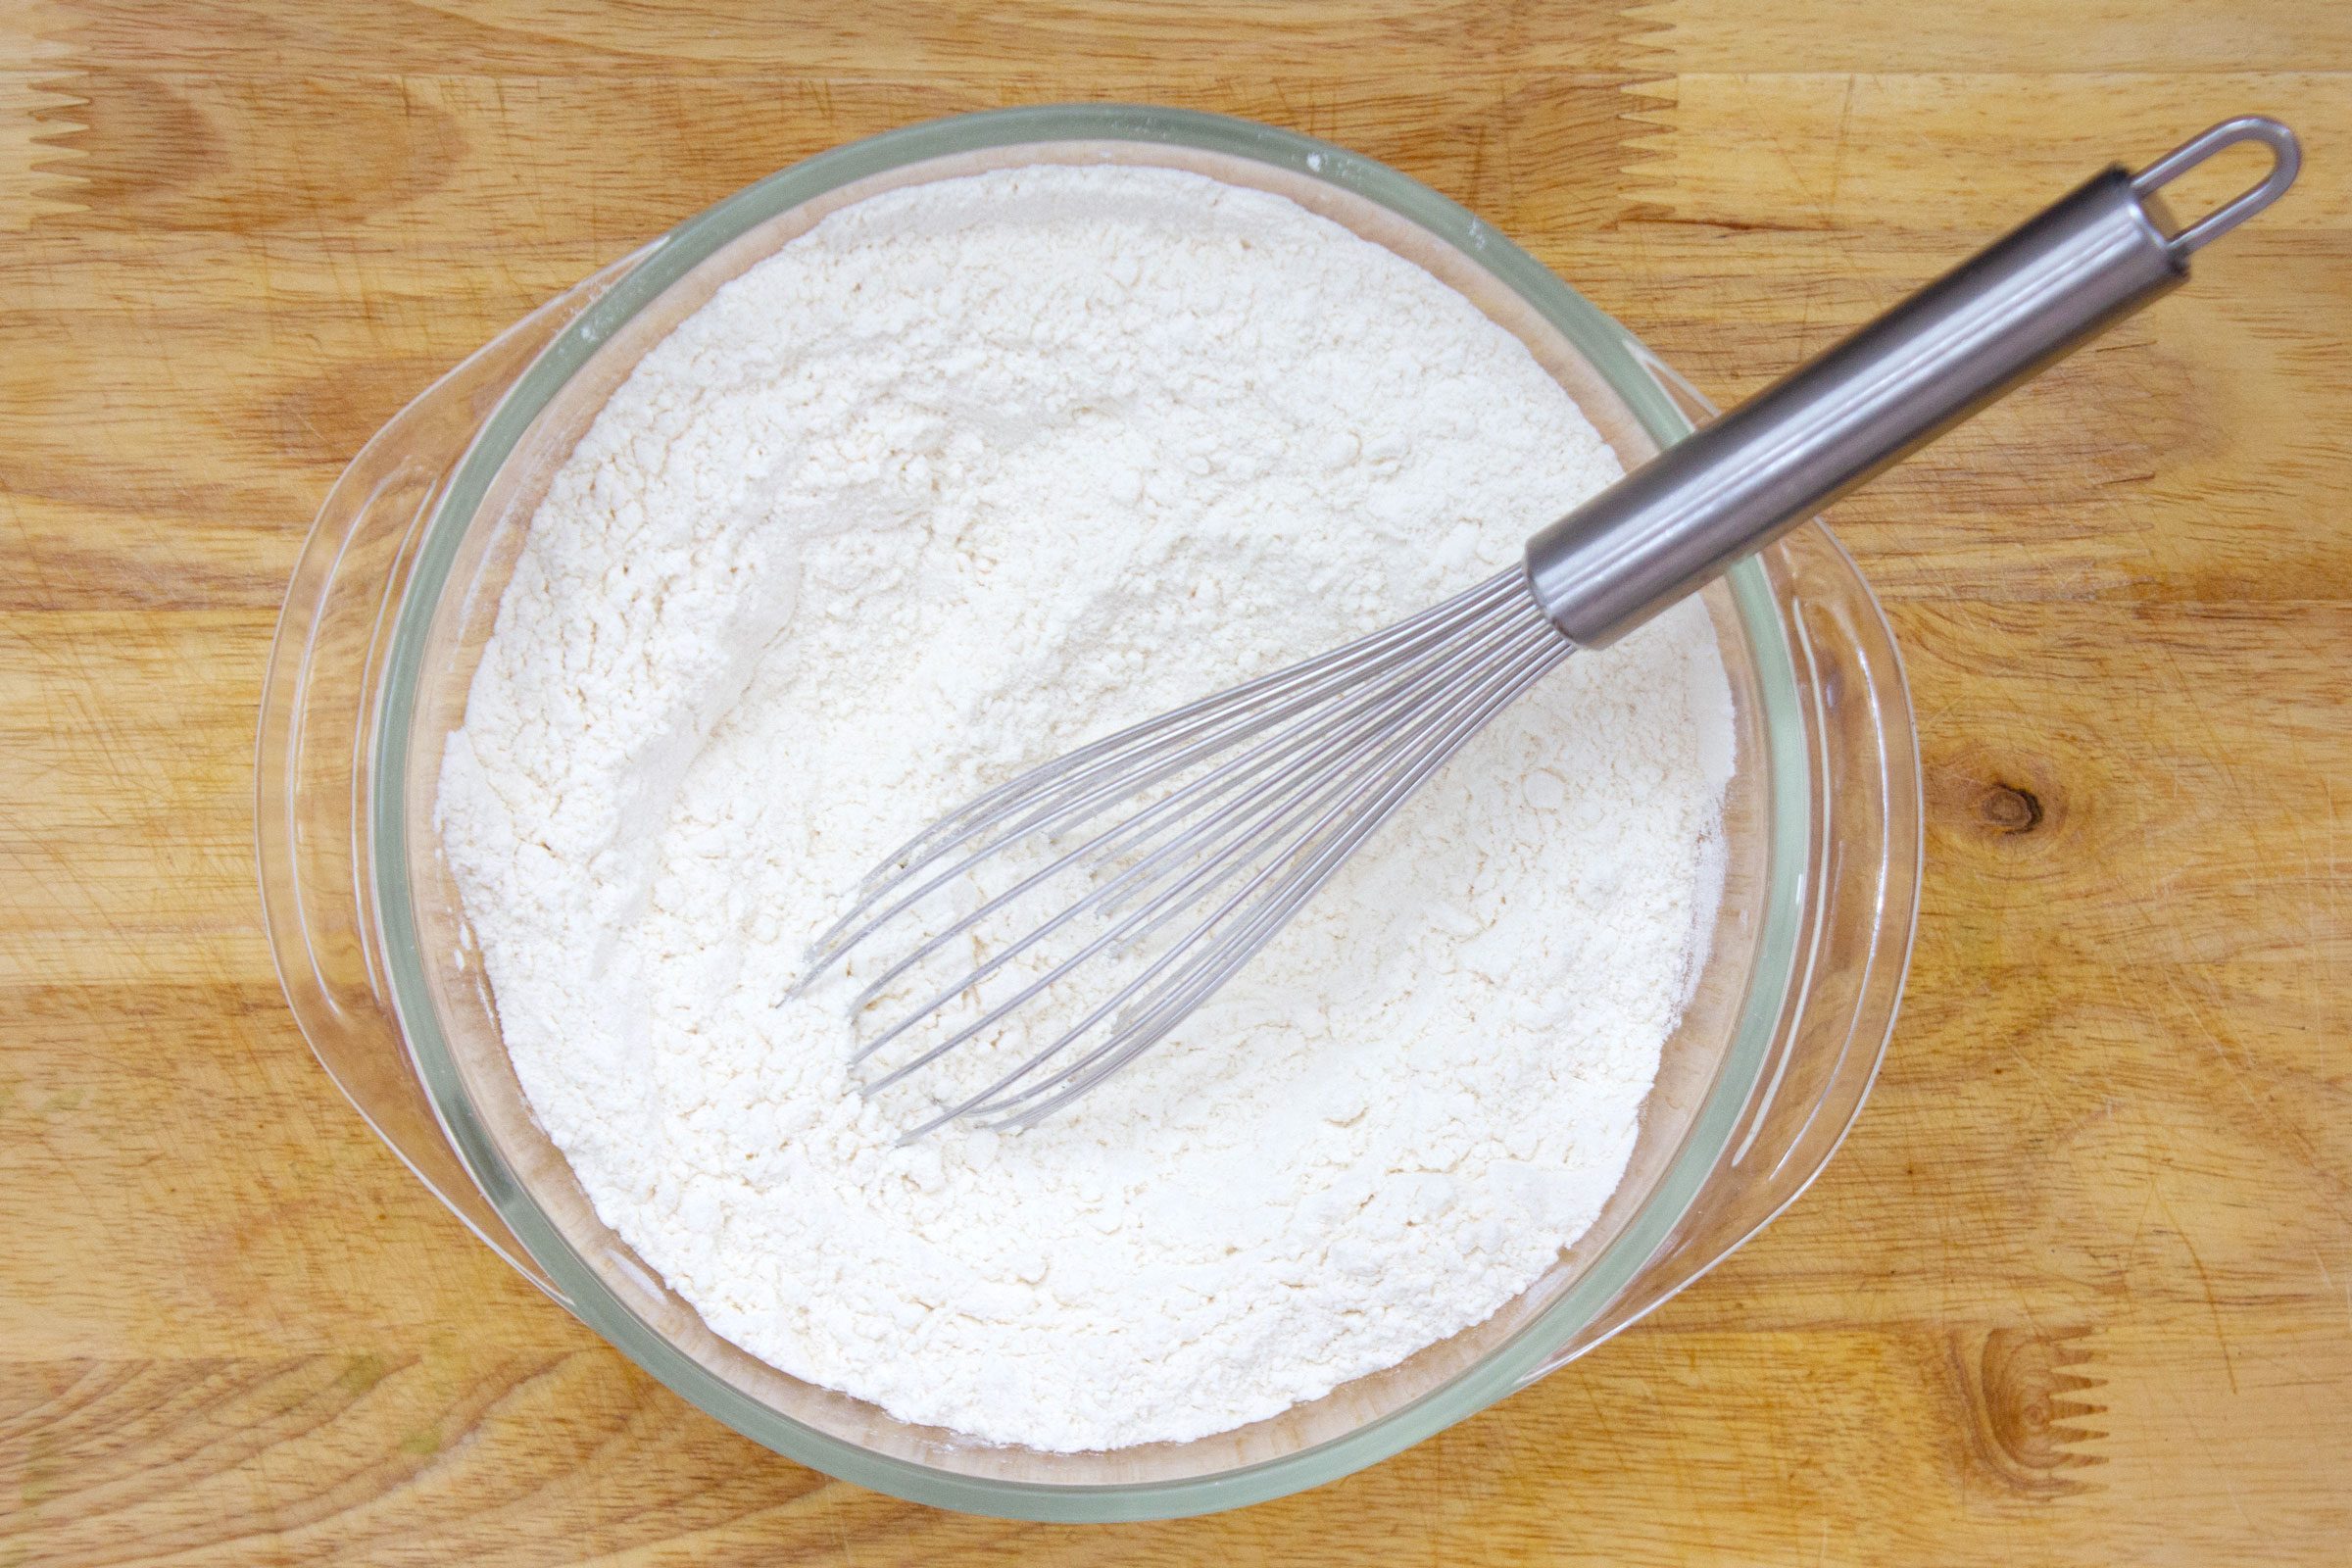 whisking together dry ingredients in a glass bowl on a wooden surface